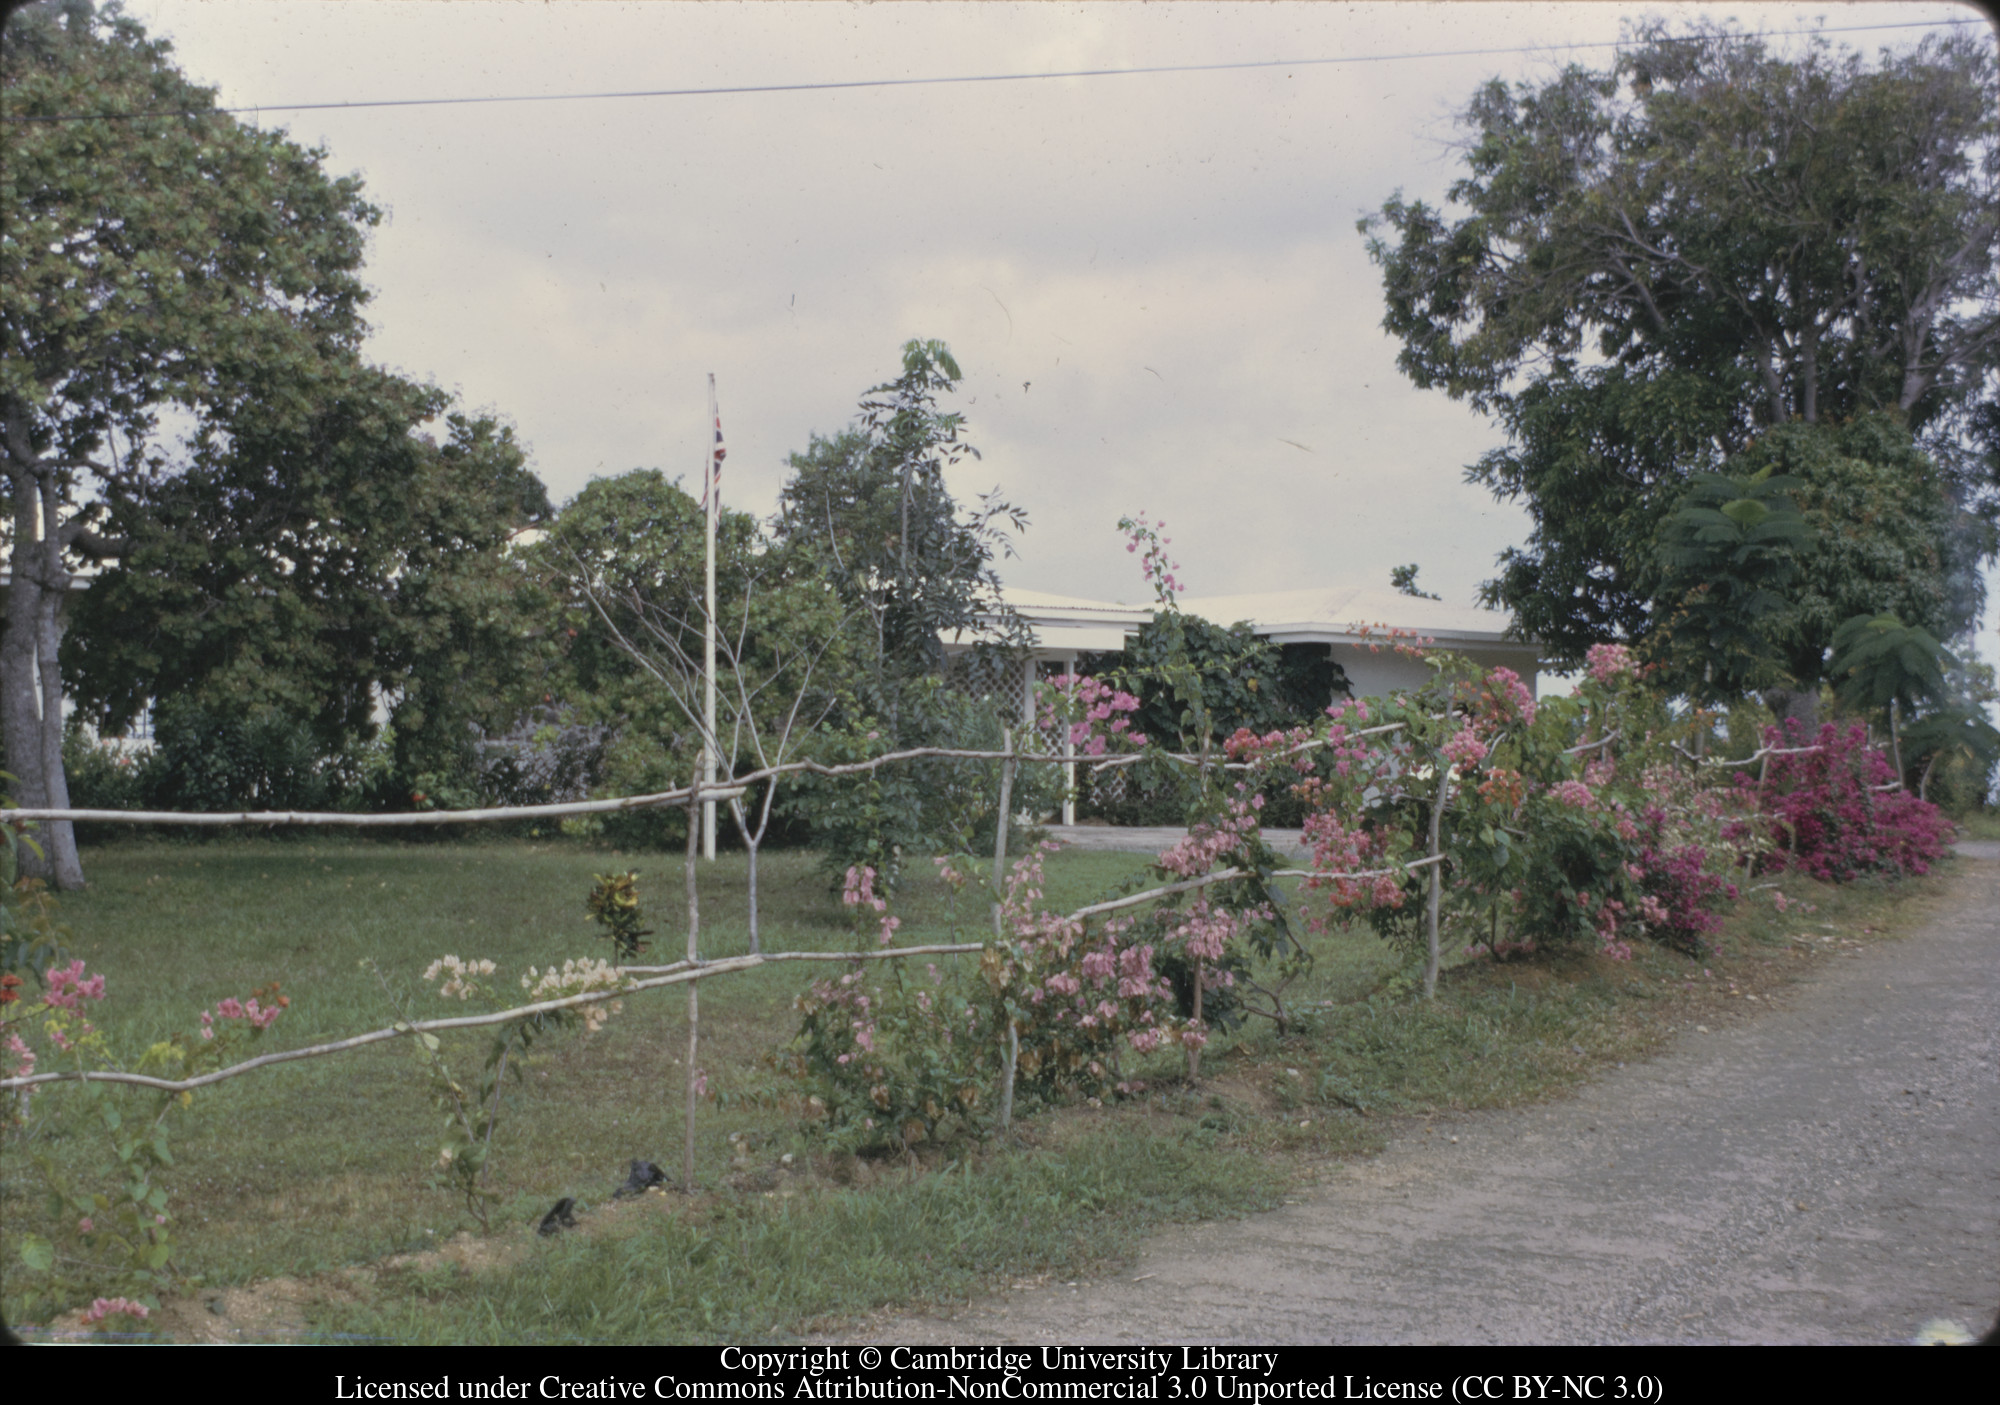 C [Ciceron] from road after replanting the hedge, 1972-09